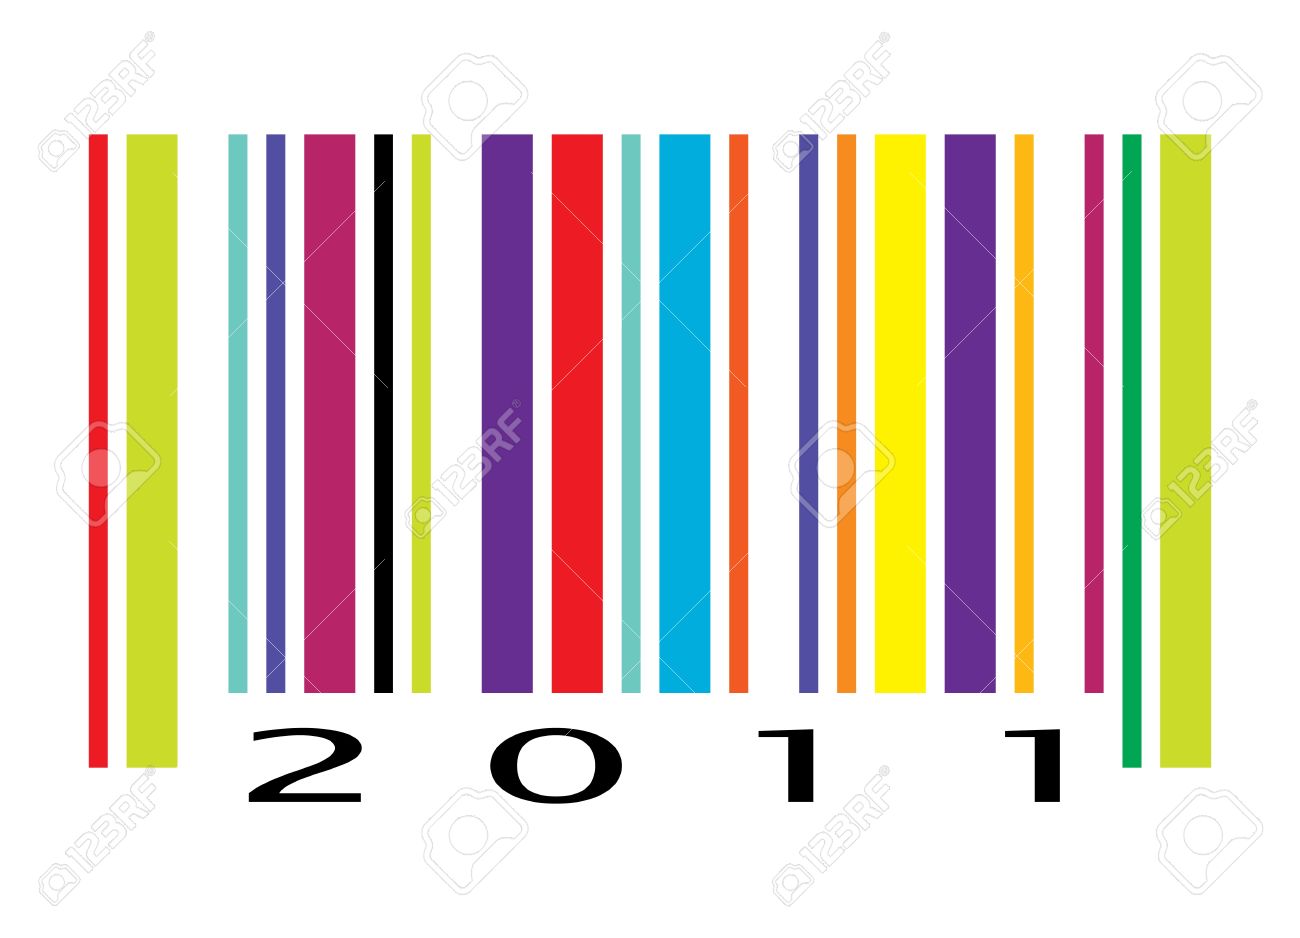 ink and barcode clipart